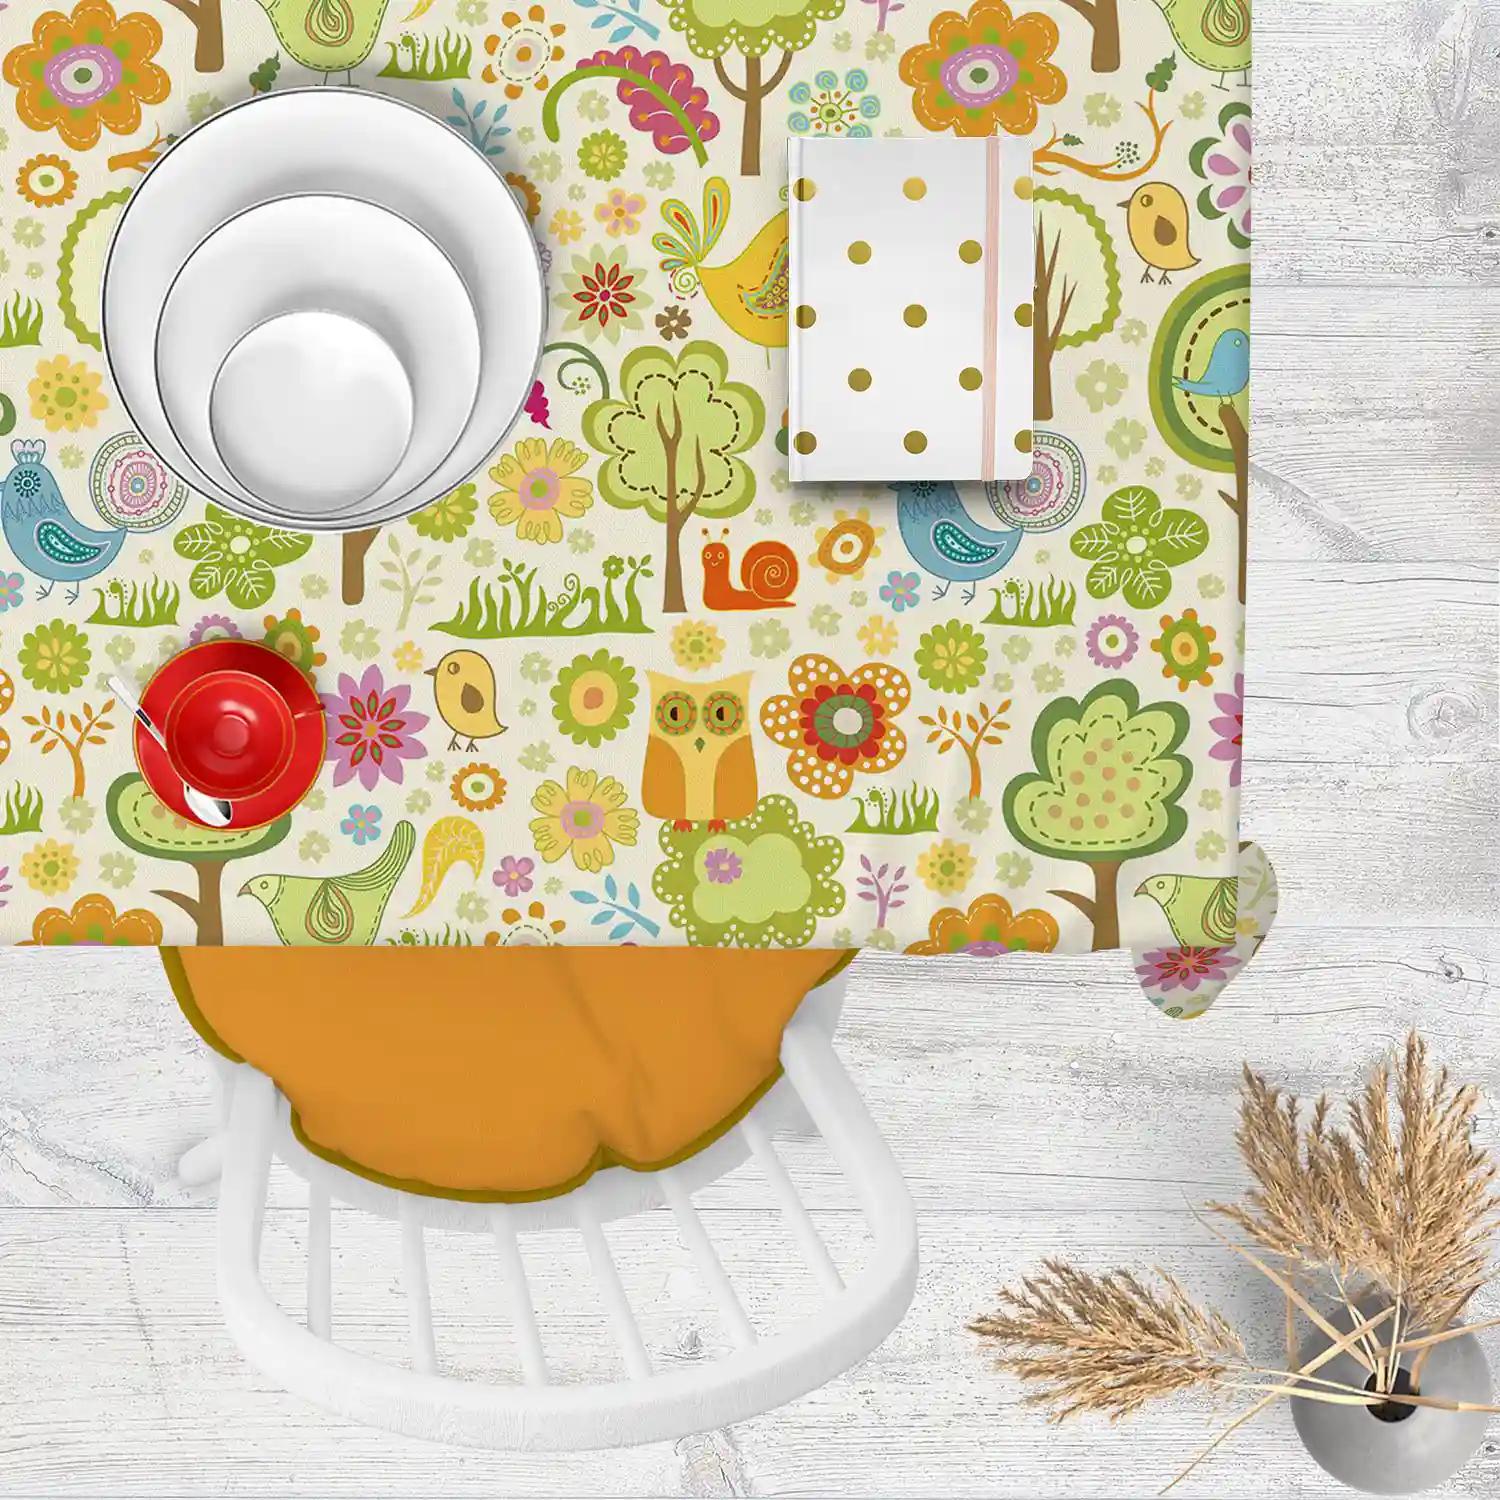 ArtzFolio Chirpy Bird | Table Cloth Cover for Dining & Center Table